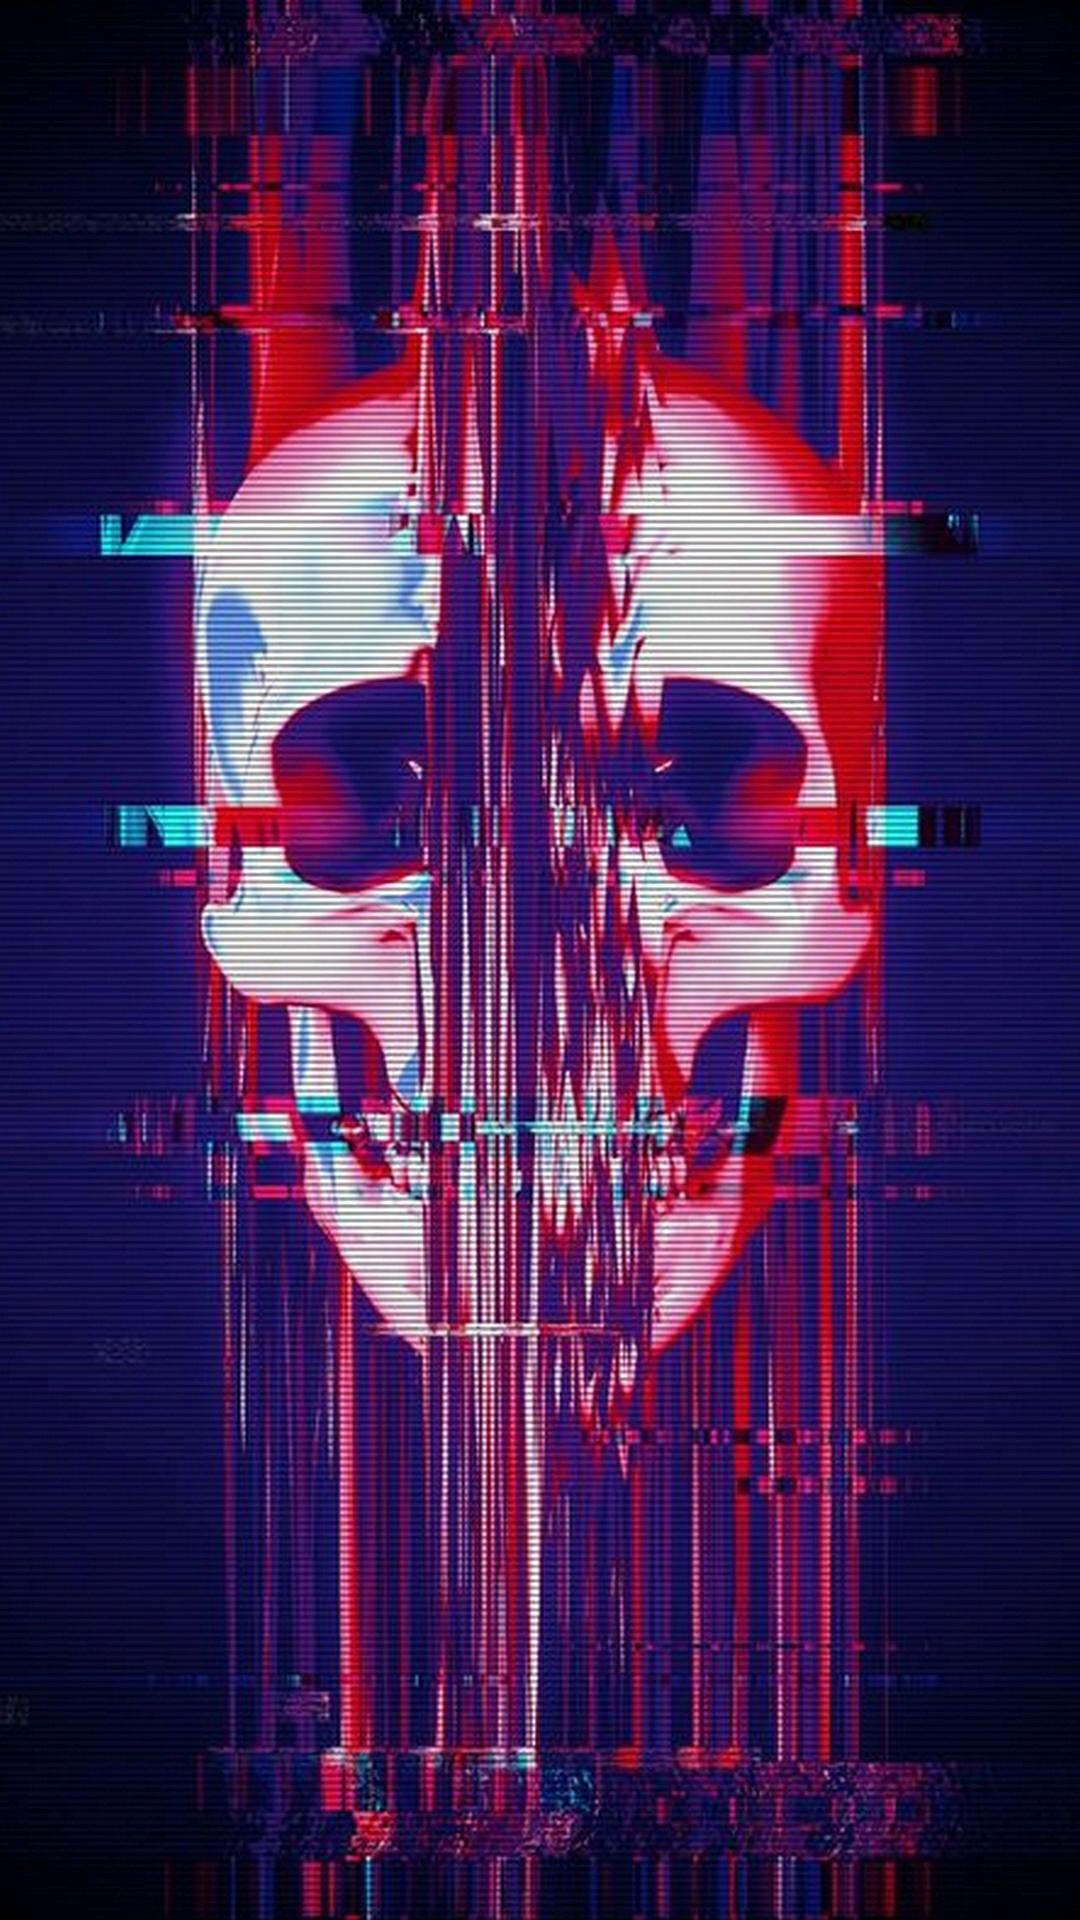 Glitch art Effect Wallpaper HD for Android